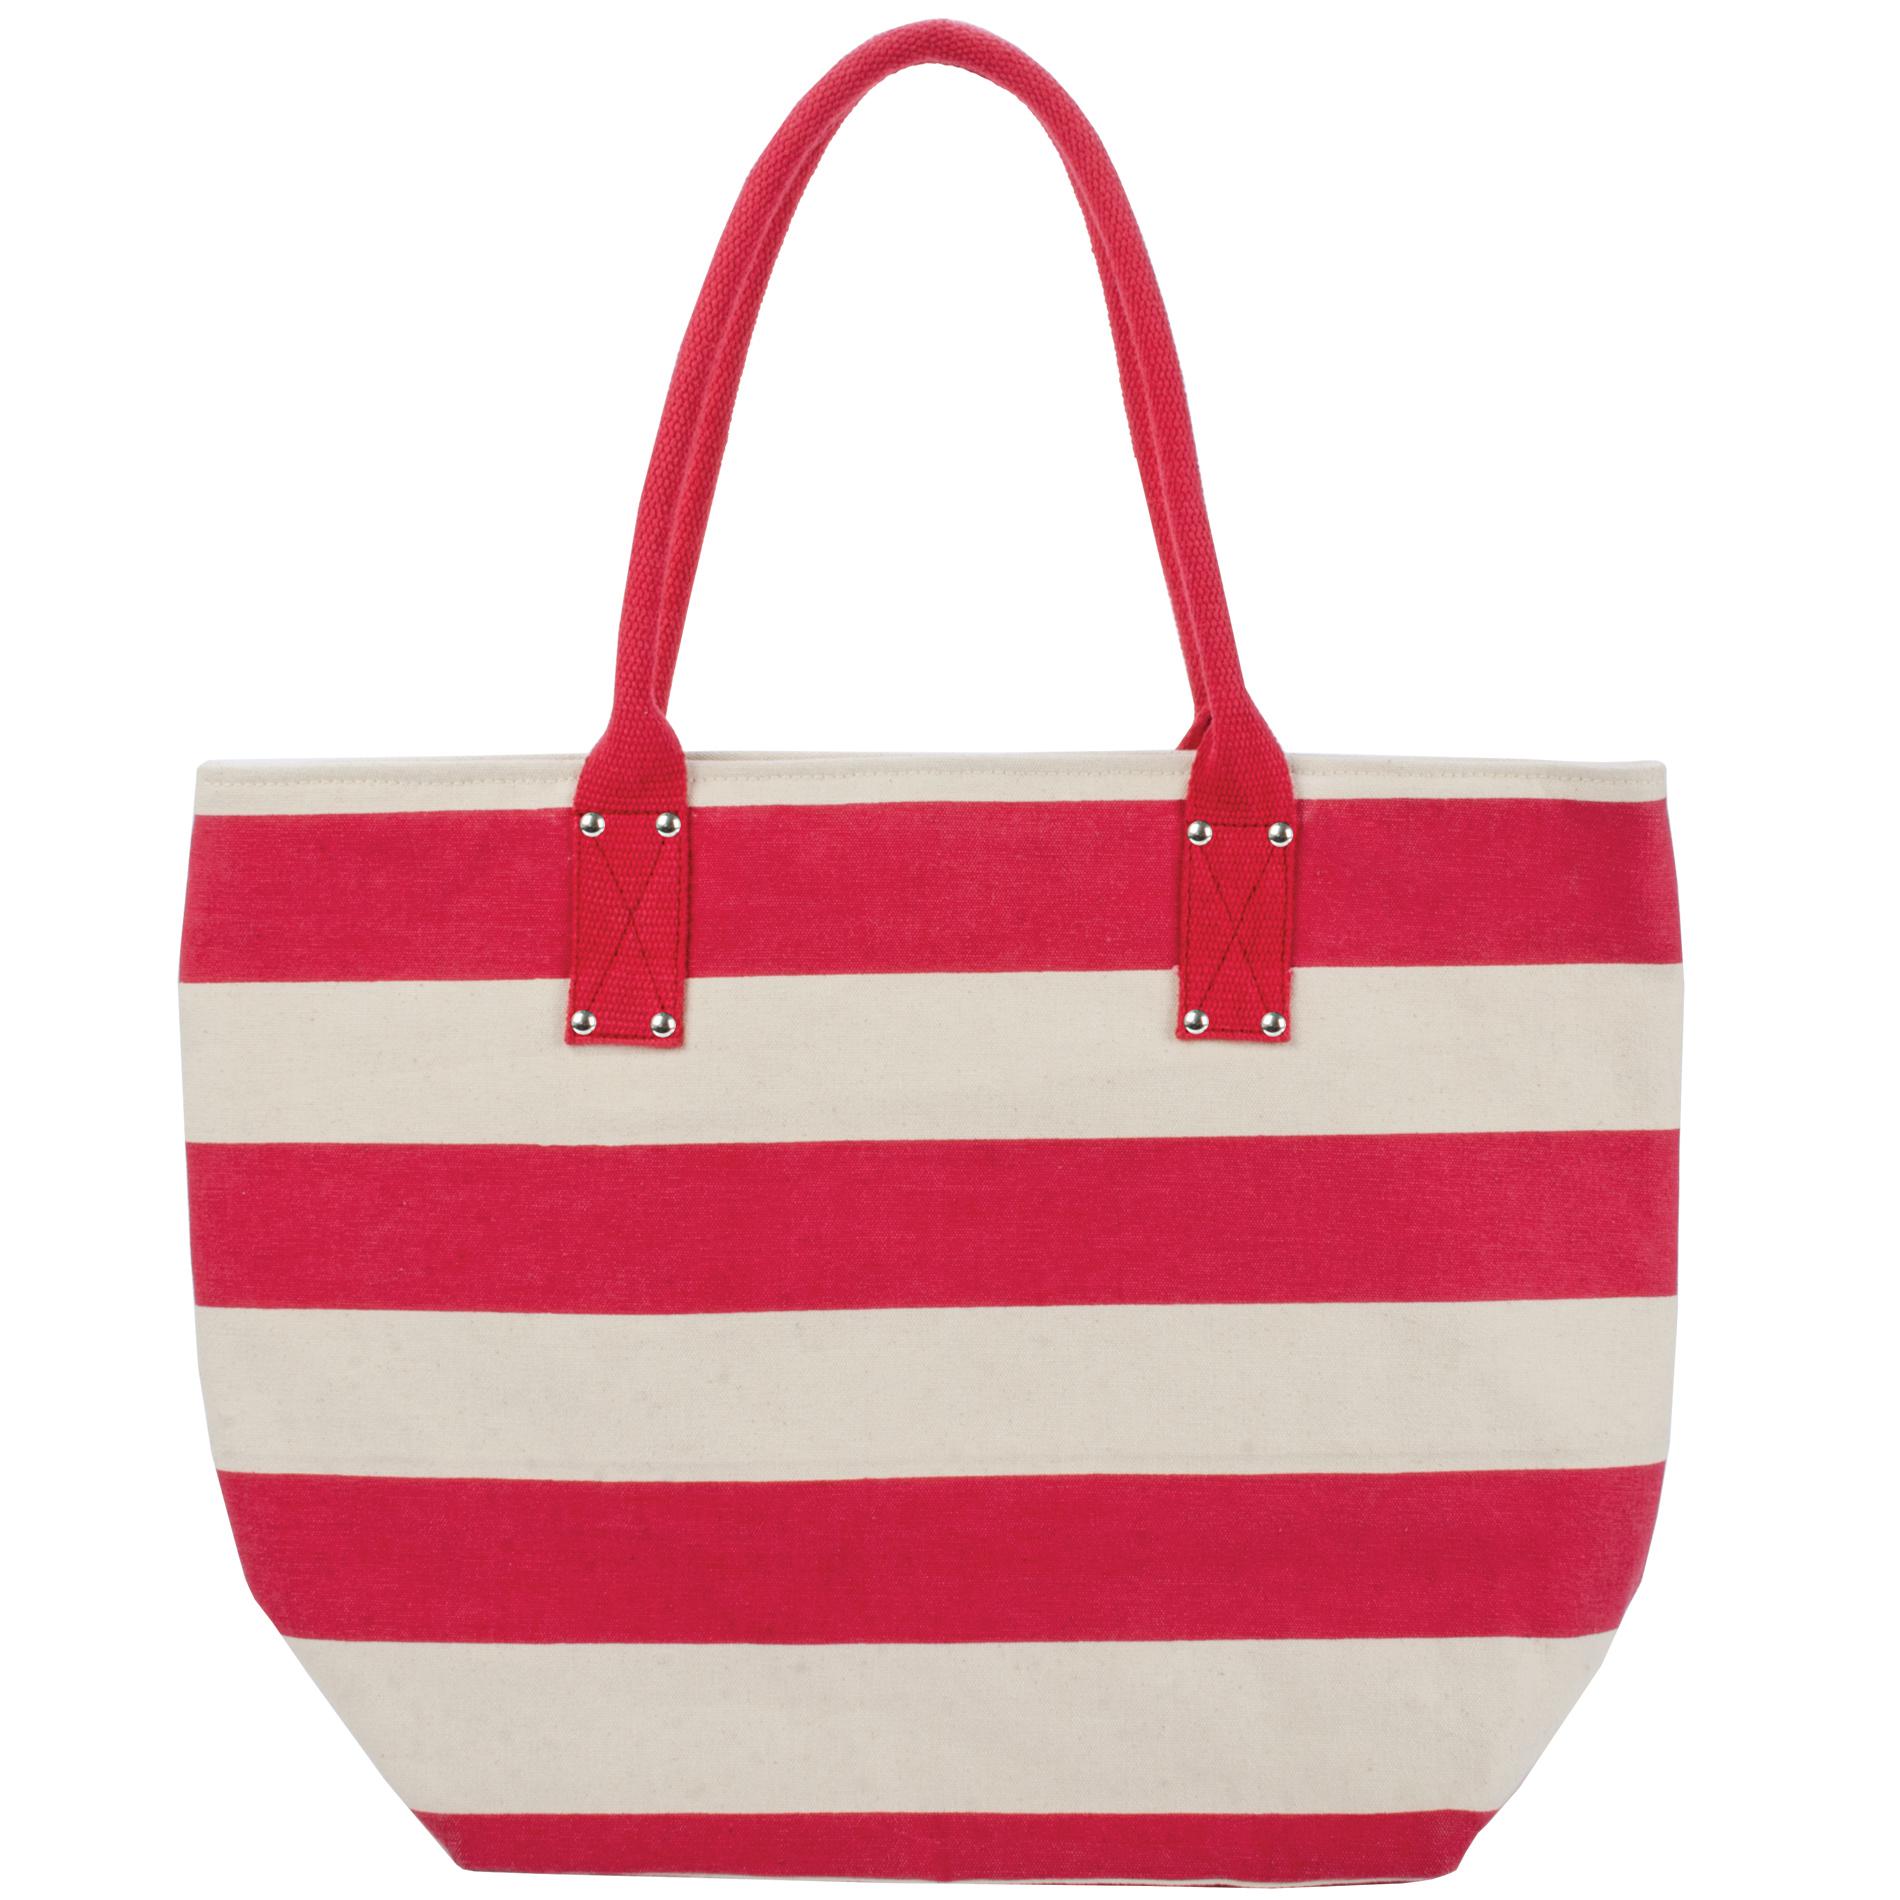 Women's For The Love Of Canvas Tote Bag - Striped